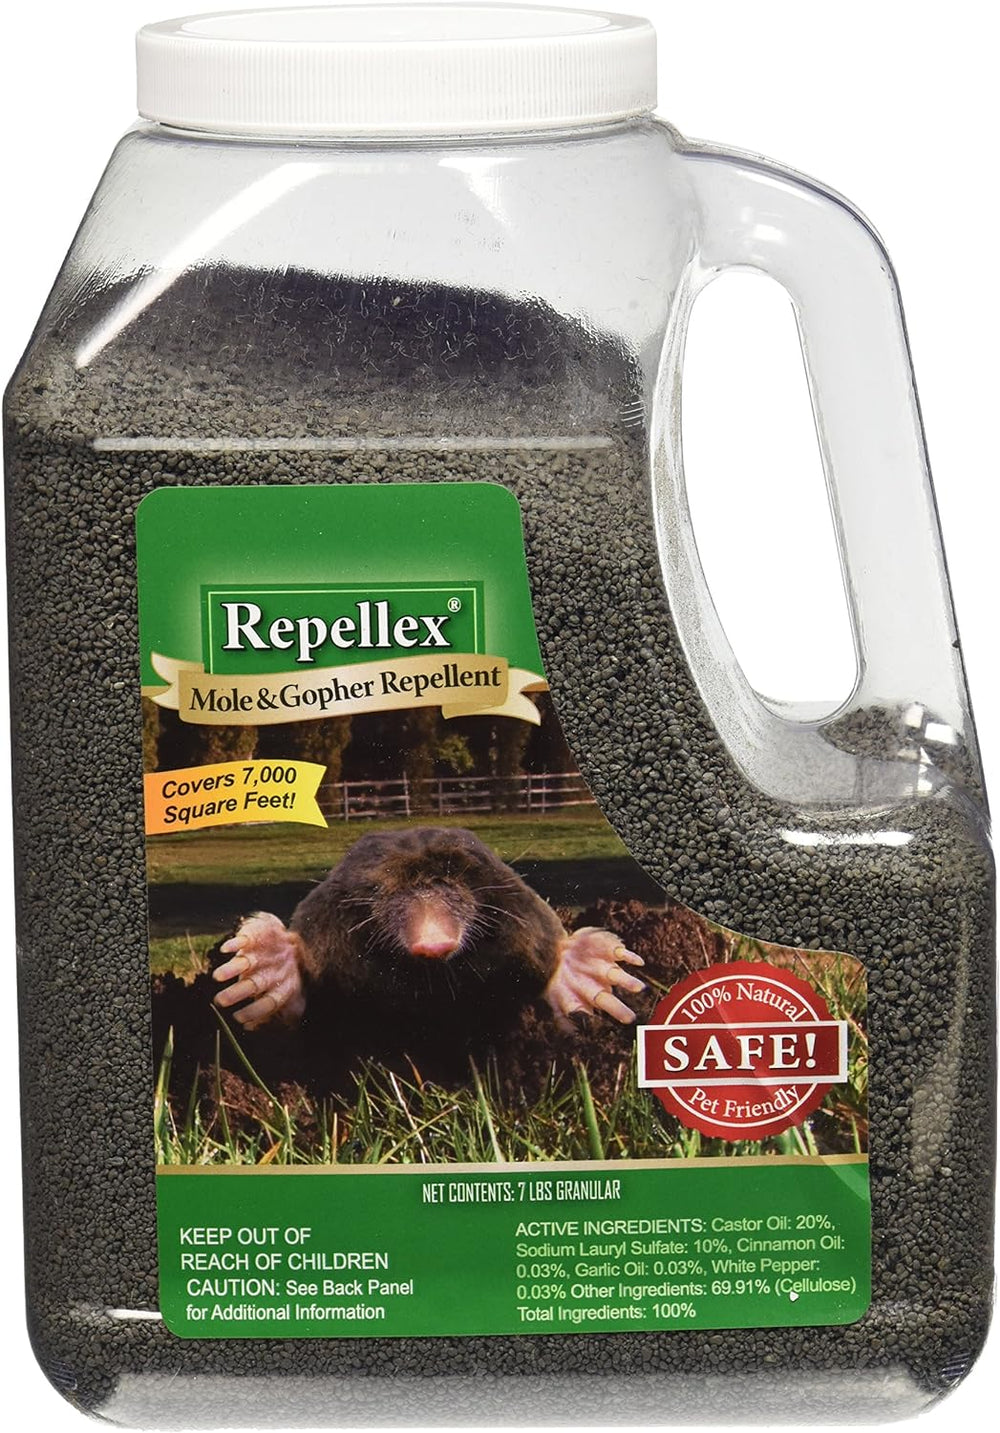 7 pound mole and gopher repellex